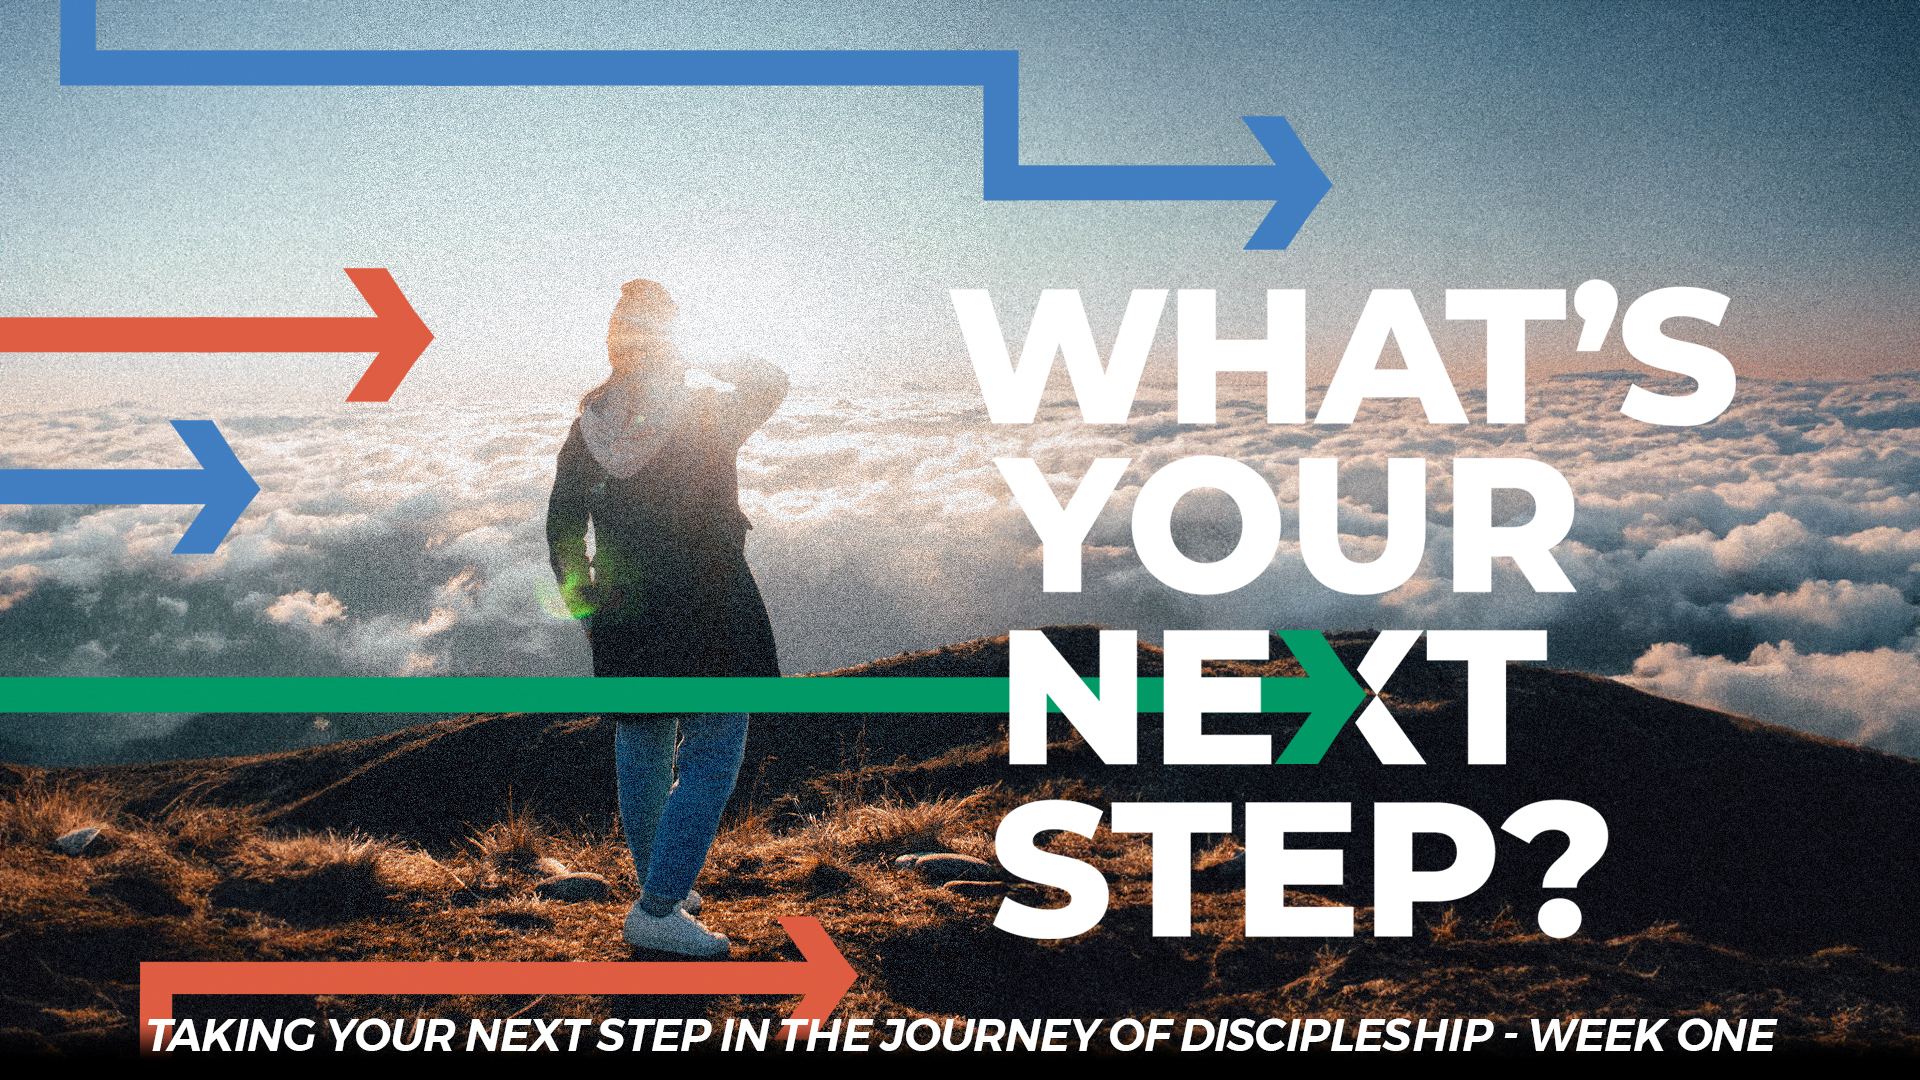 Taking your Next Step in the Journey of Discipleship - Week One